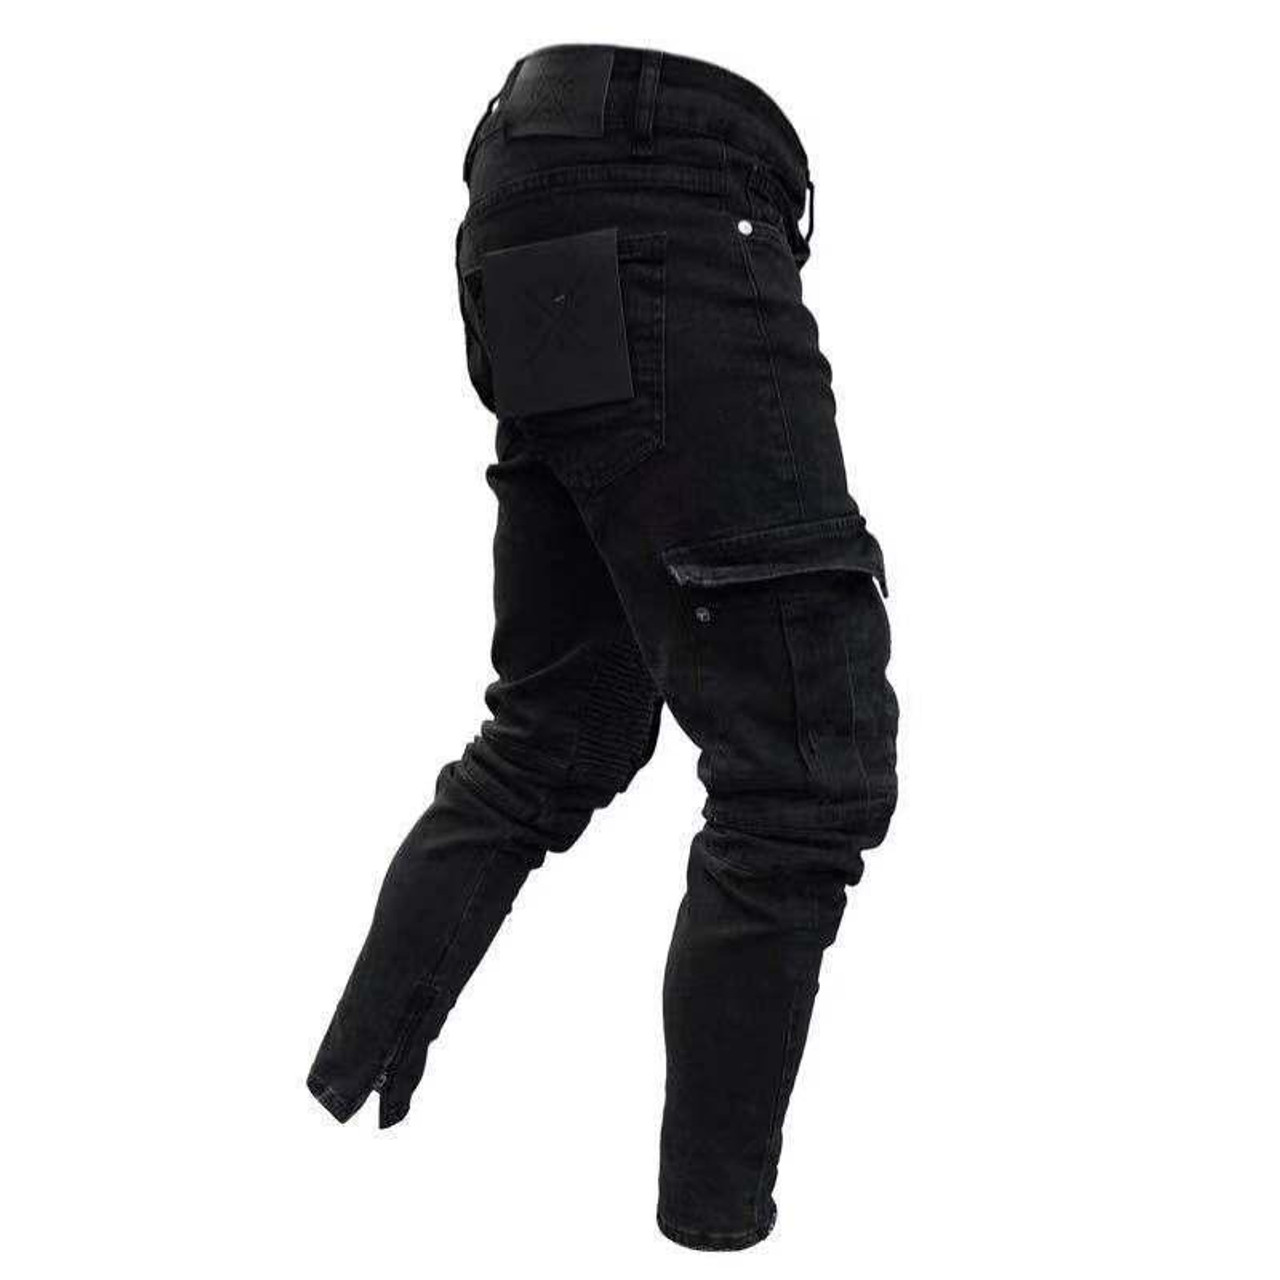 High-Octane Style: Men's Designer Black Leather Motorcycle Biker Pants  Trousers | Free Shipping Included